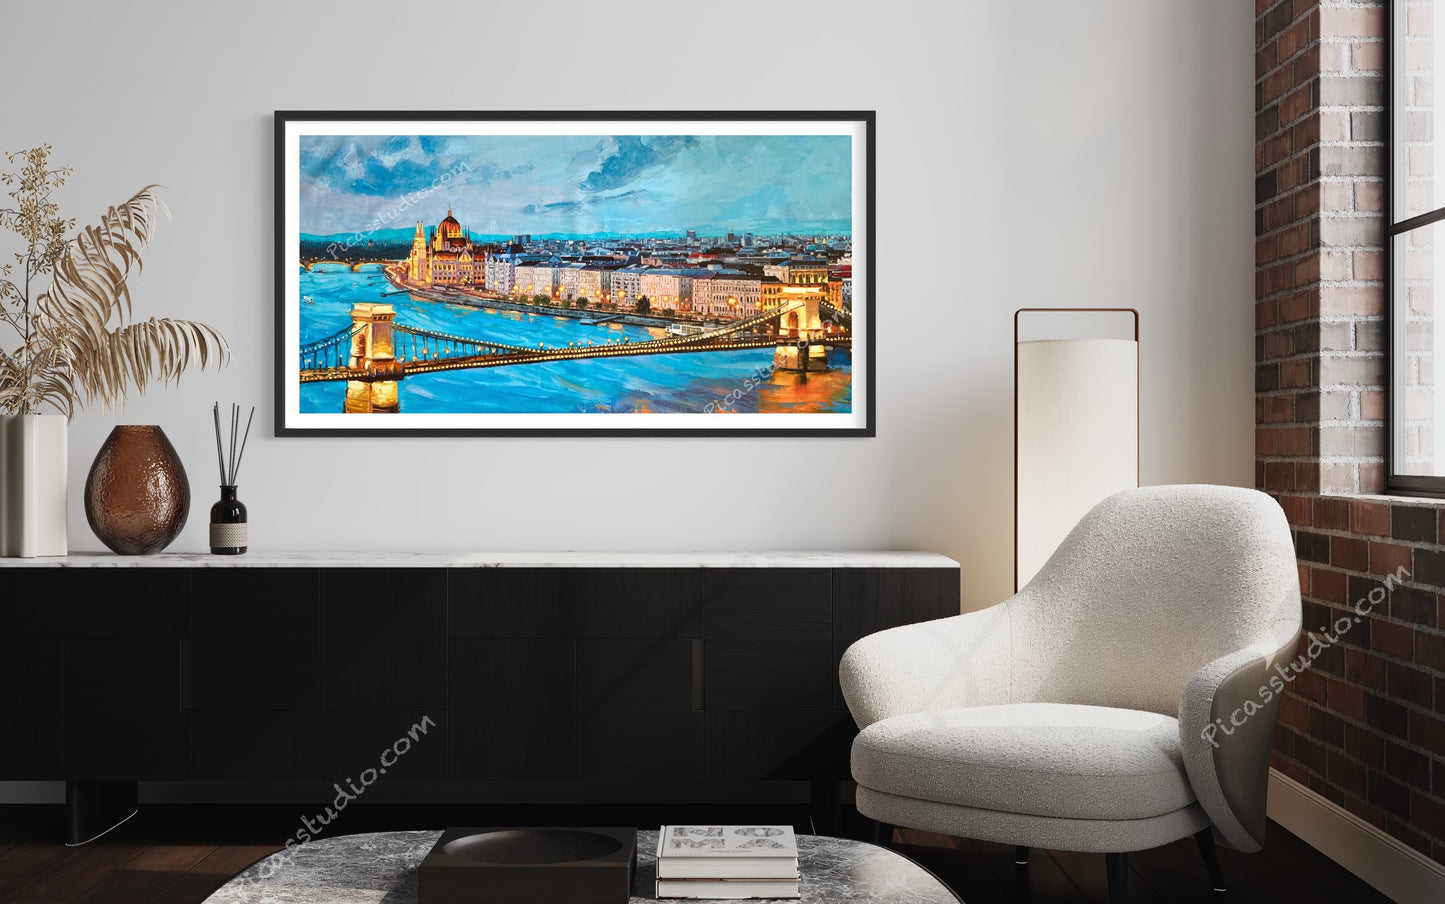 Budapest Oil Painting Cityscape Landscape Hand Painted on Canvas Rich Textured Wall Art Decor Unframed